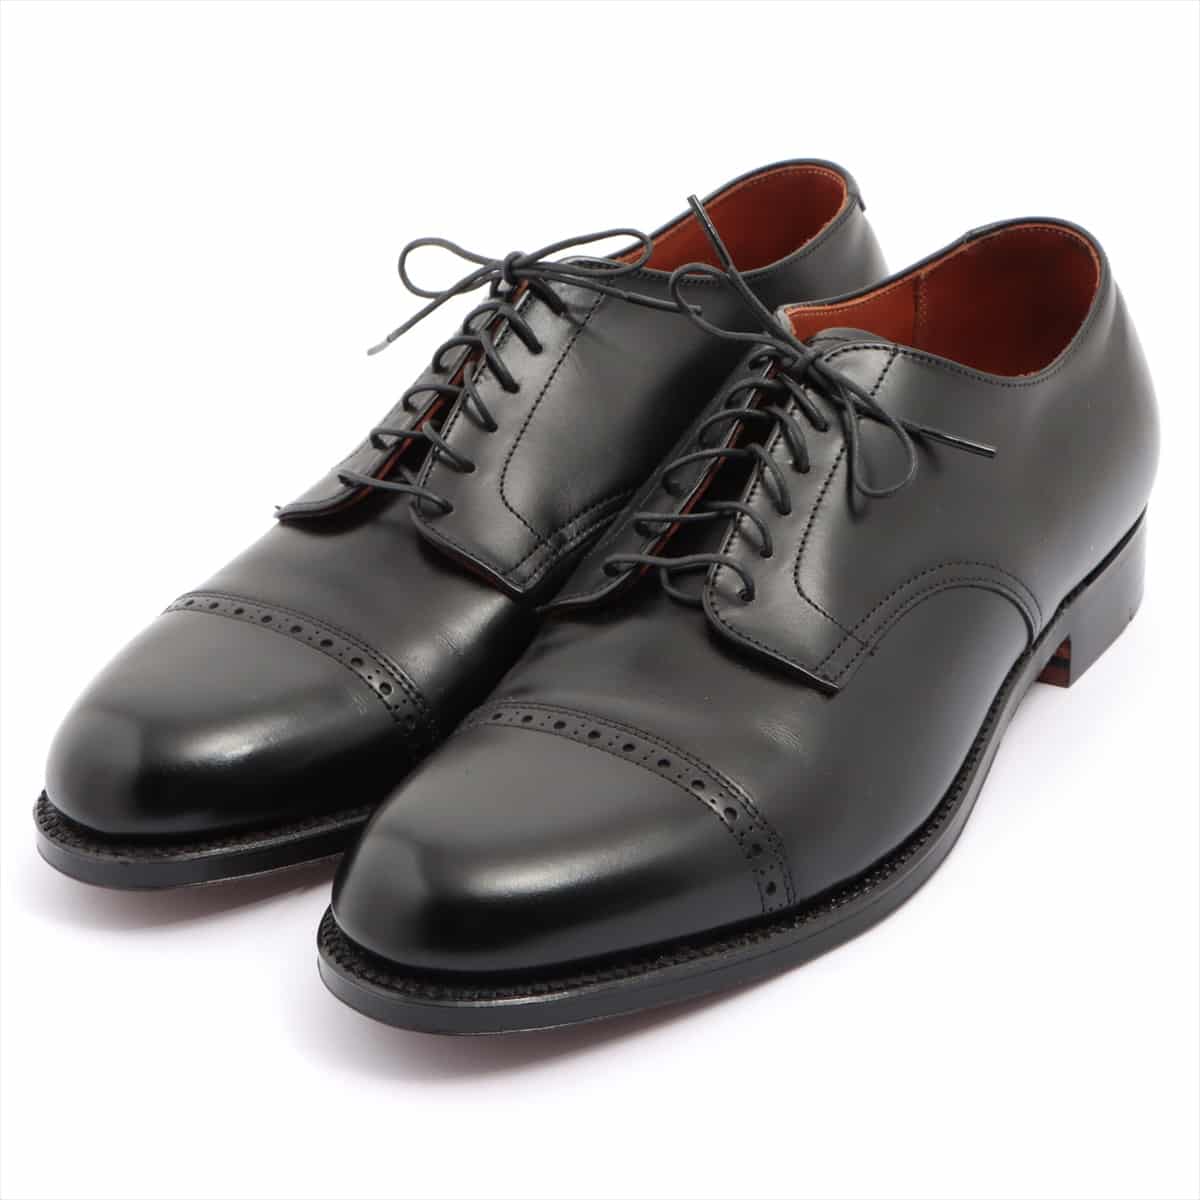 Alden Leather Leather shoes 9 Men's Black Straight tip genuine shoe keeper with cream